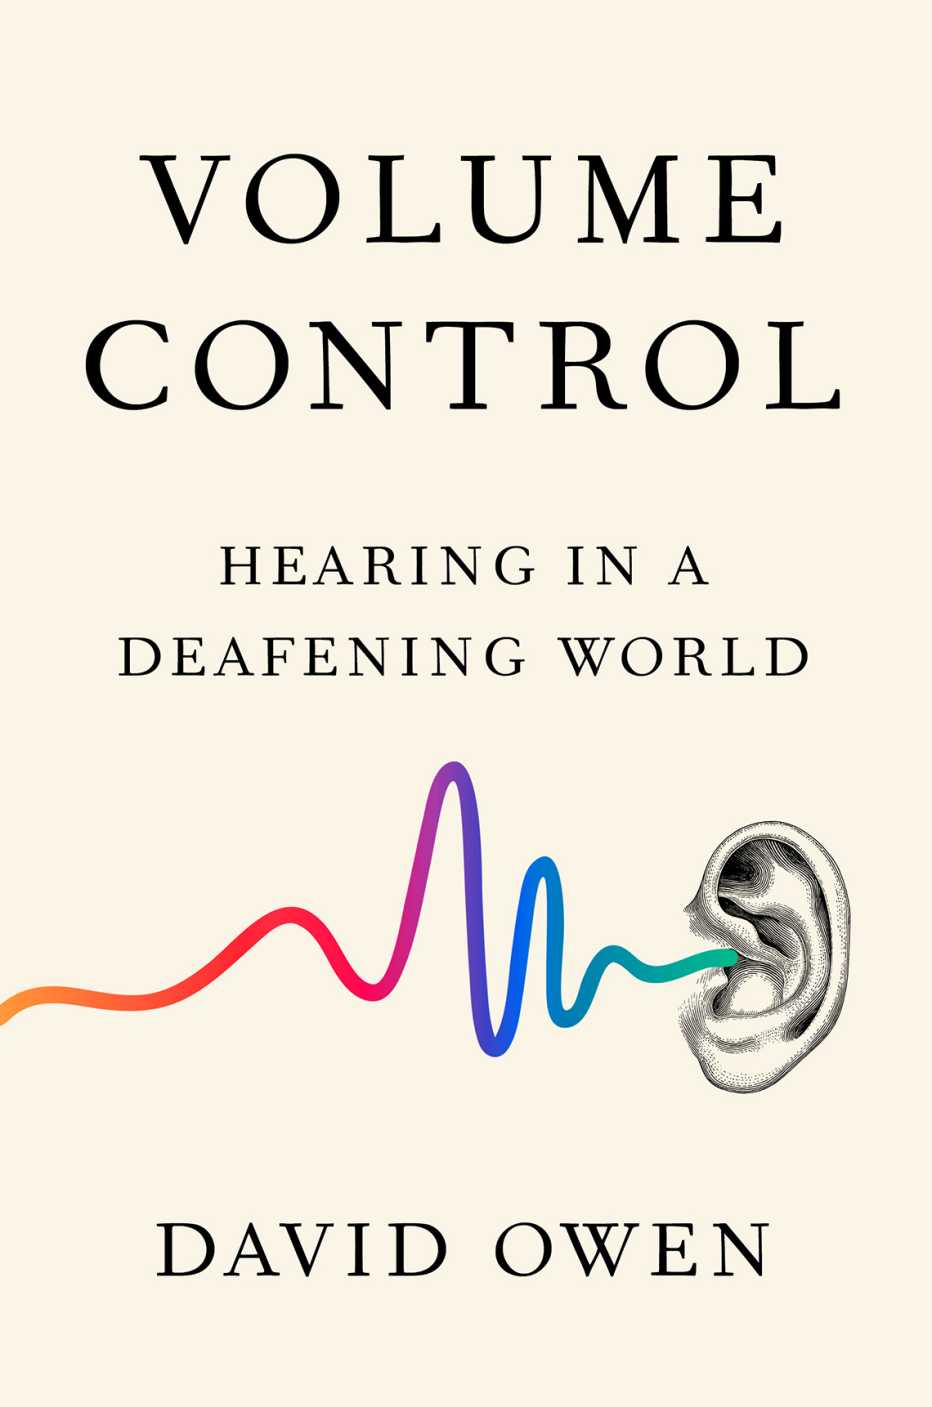 The cover for the book, Volume Control: Hearing in a Deafening World